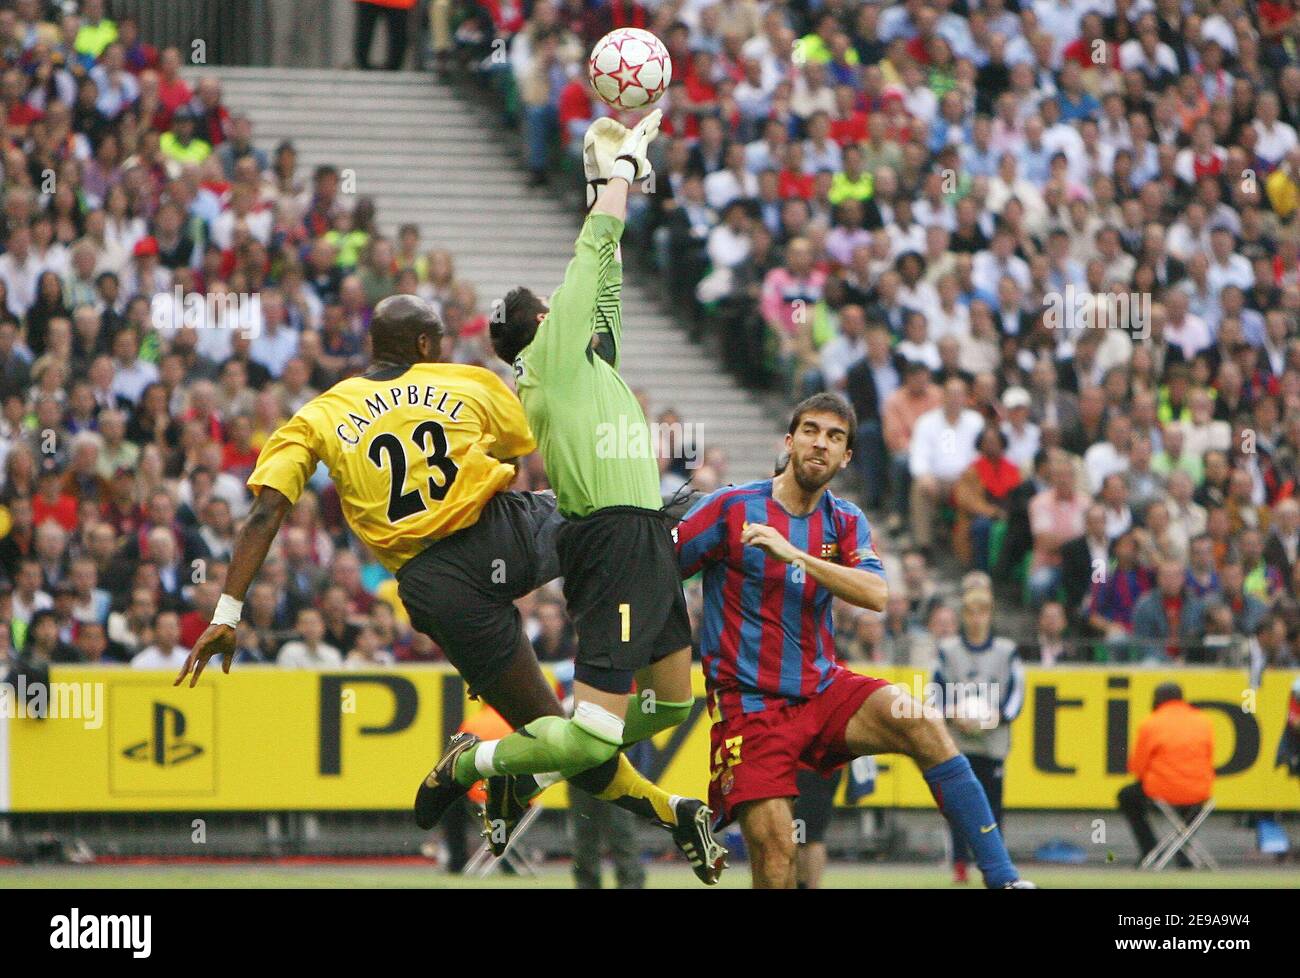 Arsenal's Sol Campbell scoring during the Champions League final, Barcelona vs Arsenal, at the Stade de France, in Saint Denis, near Paris, France, on May 17, 2006. Barcelona won 2-1. Photo by Christian Liewig/CAMELEON/ABACAPRESS.COM Stock Photo